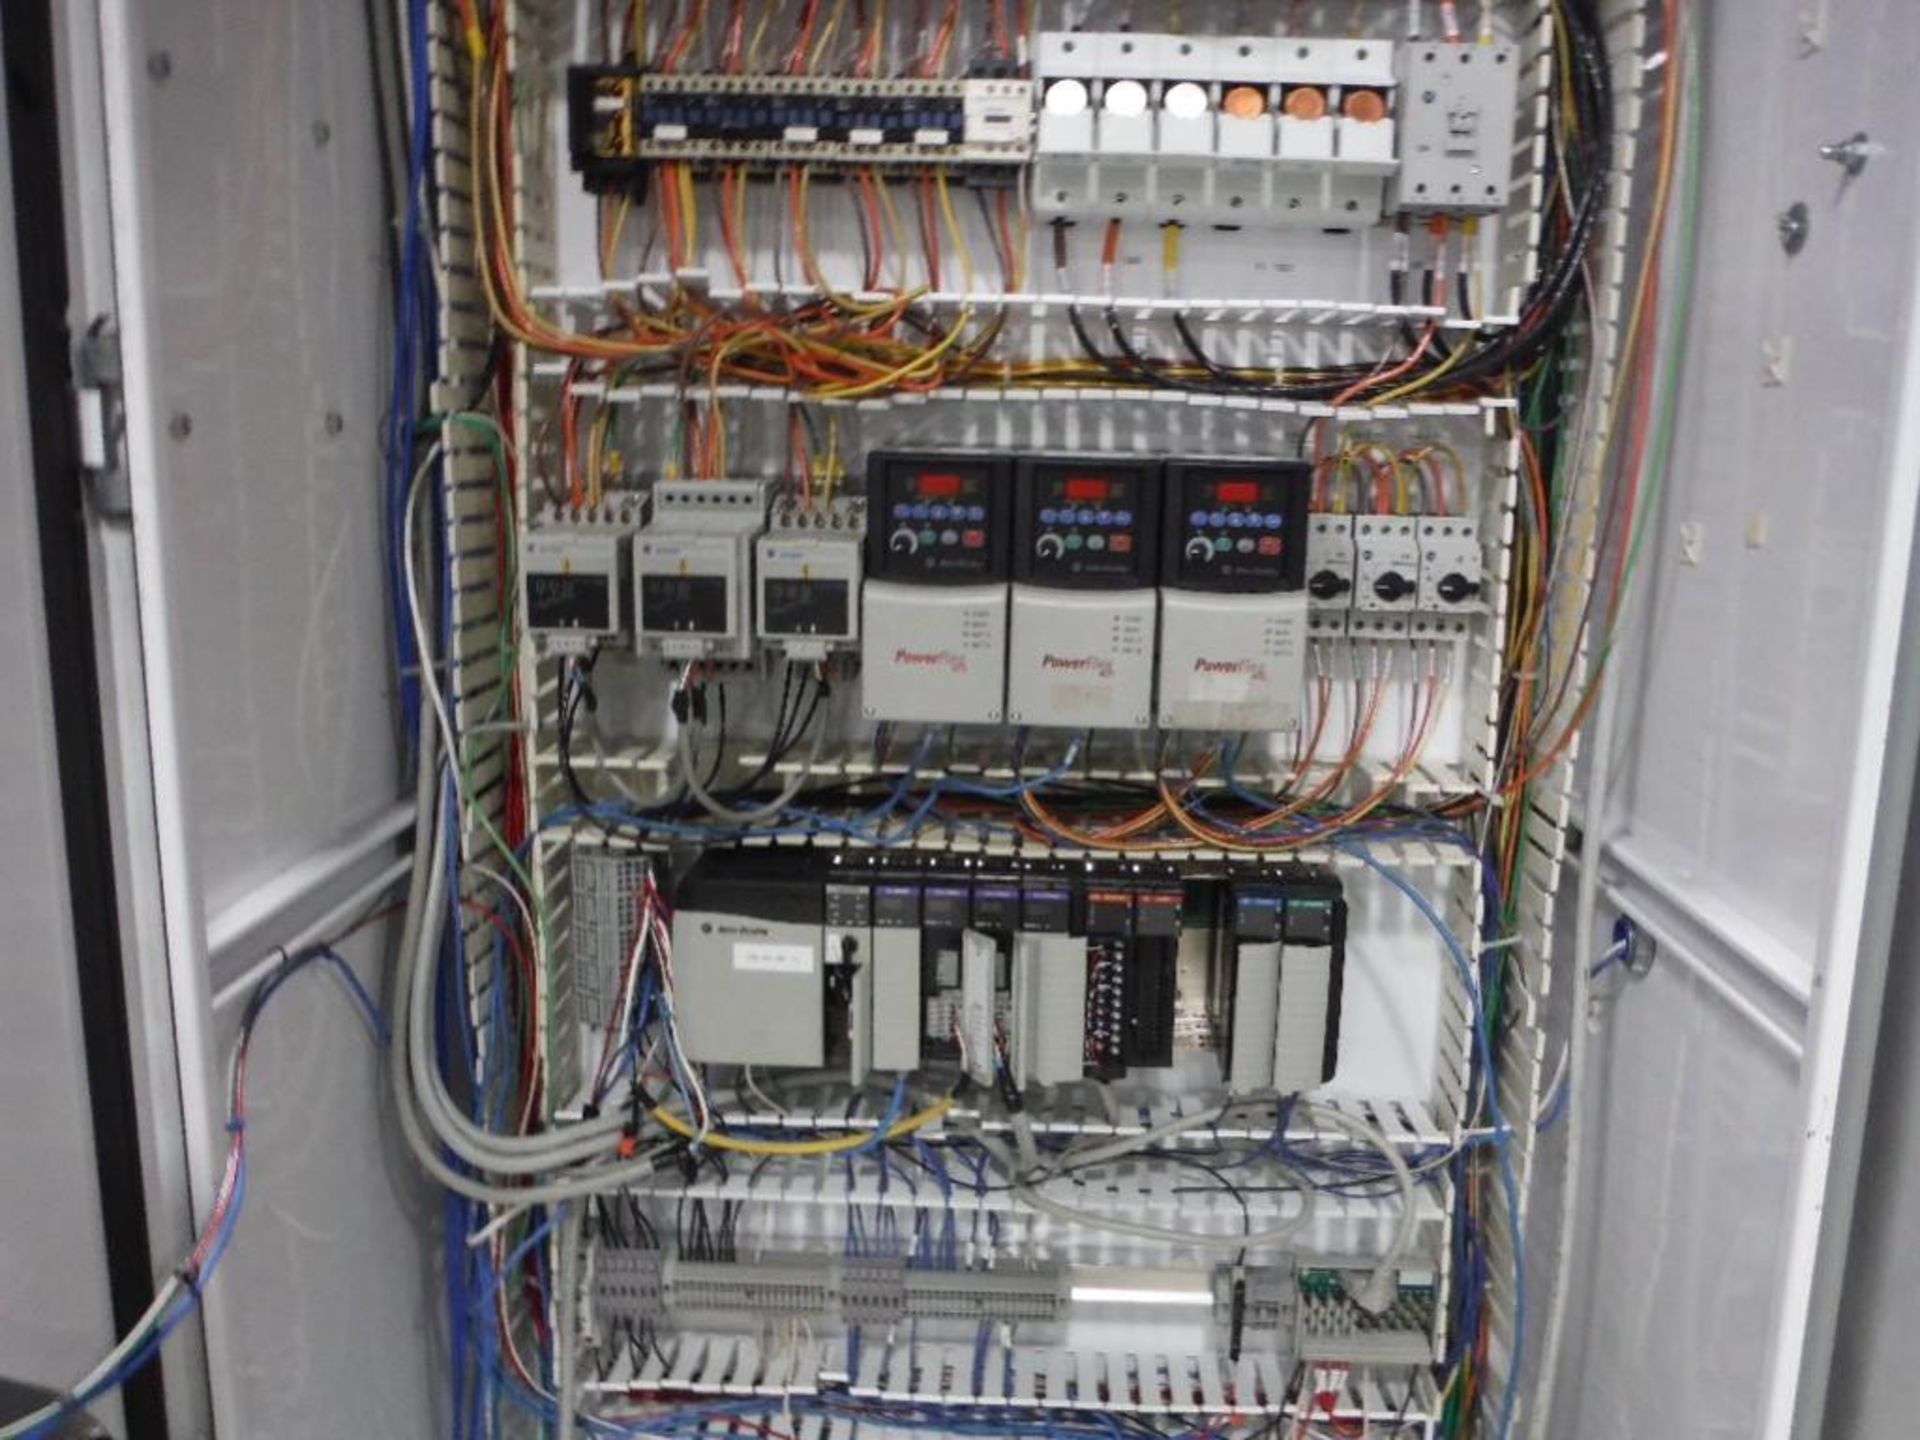 Steel control cabinet with Allen Bradley panelview 1000, (3) powerflex 40 vfds, plc - Rigging Fee: $ - Image 4 of 5